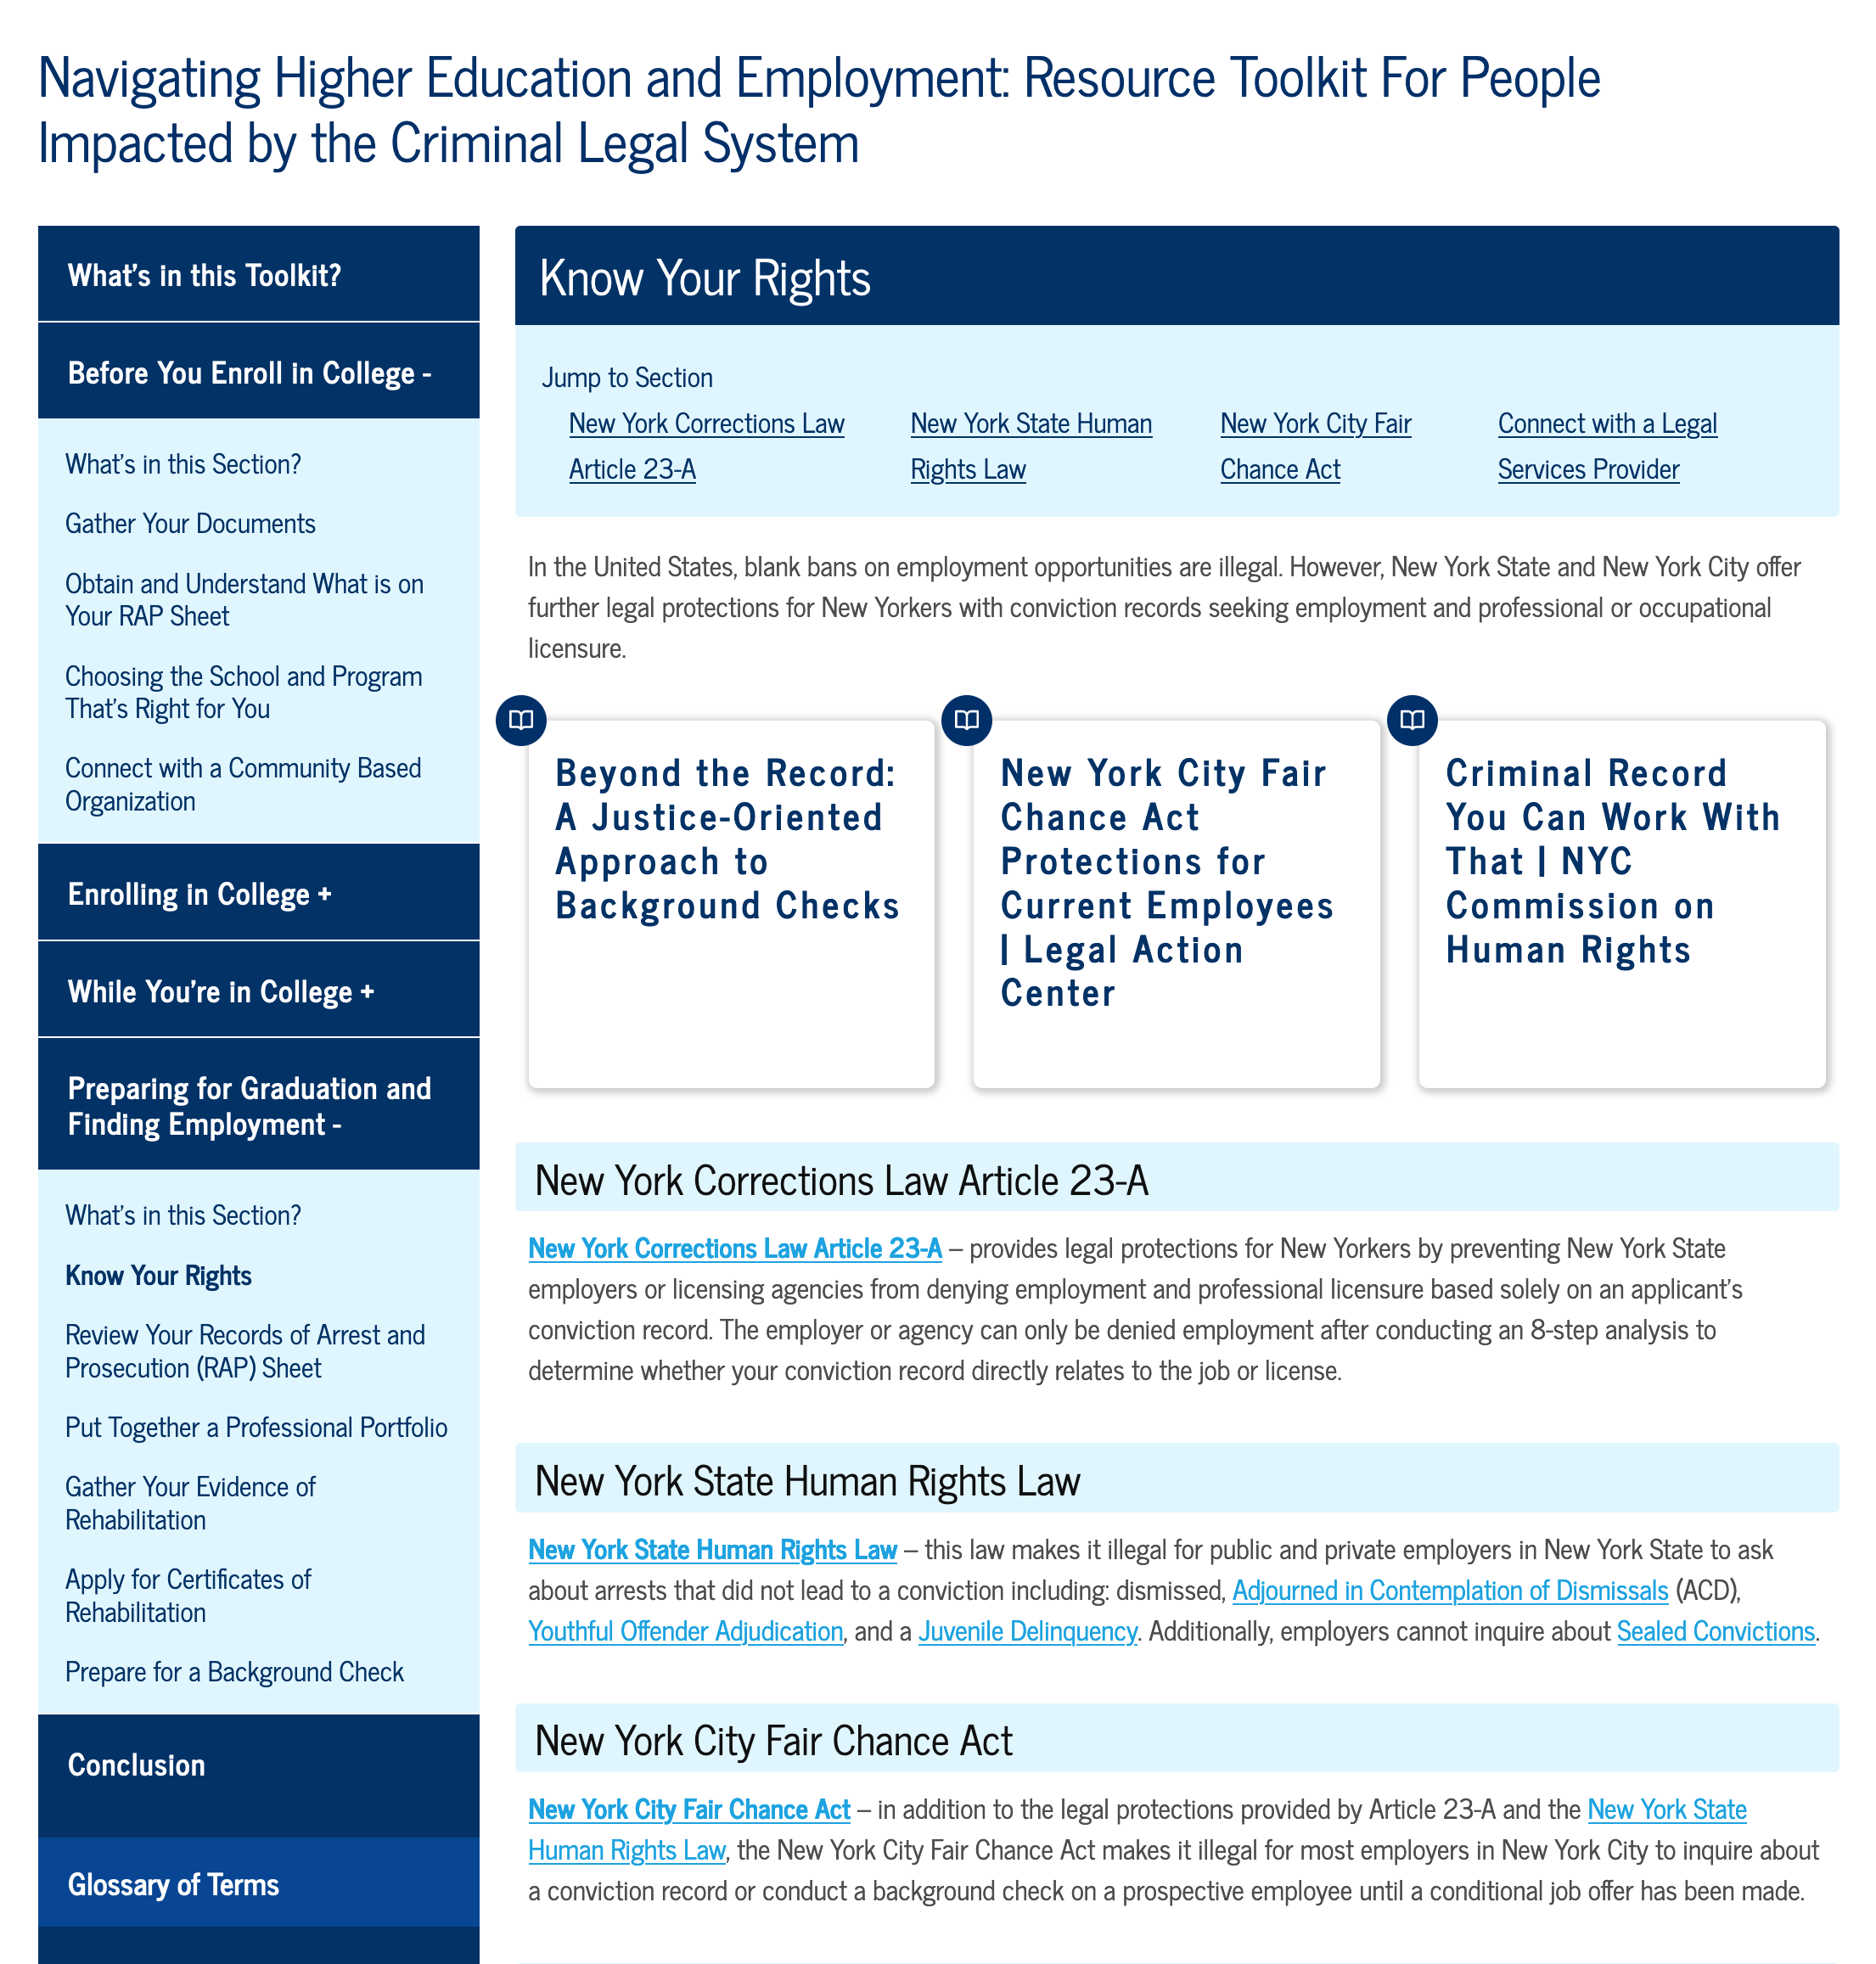 Interactive Toolkit for the Institute of Justice and Opportunity at CUNY John Jay: Justice and Opportunity Institute Toolkit: Section and Chapter Layout